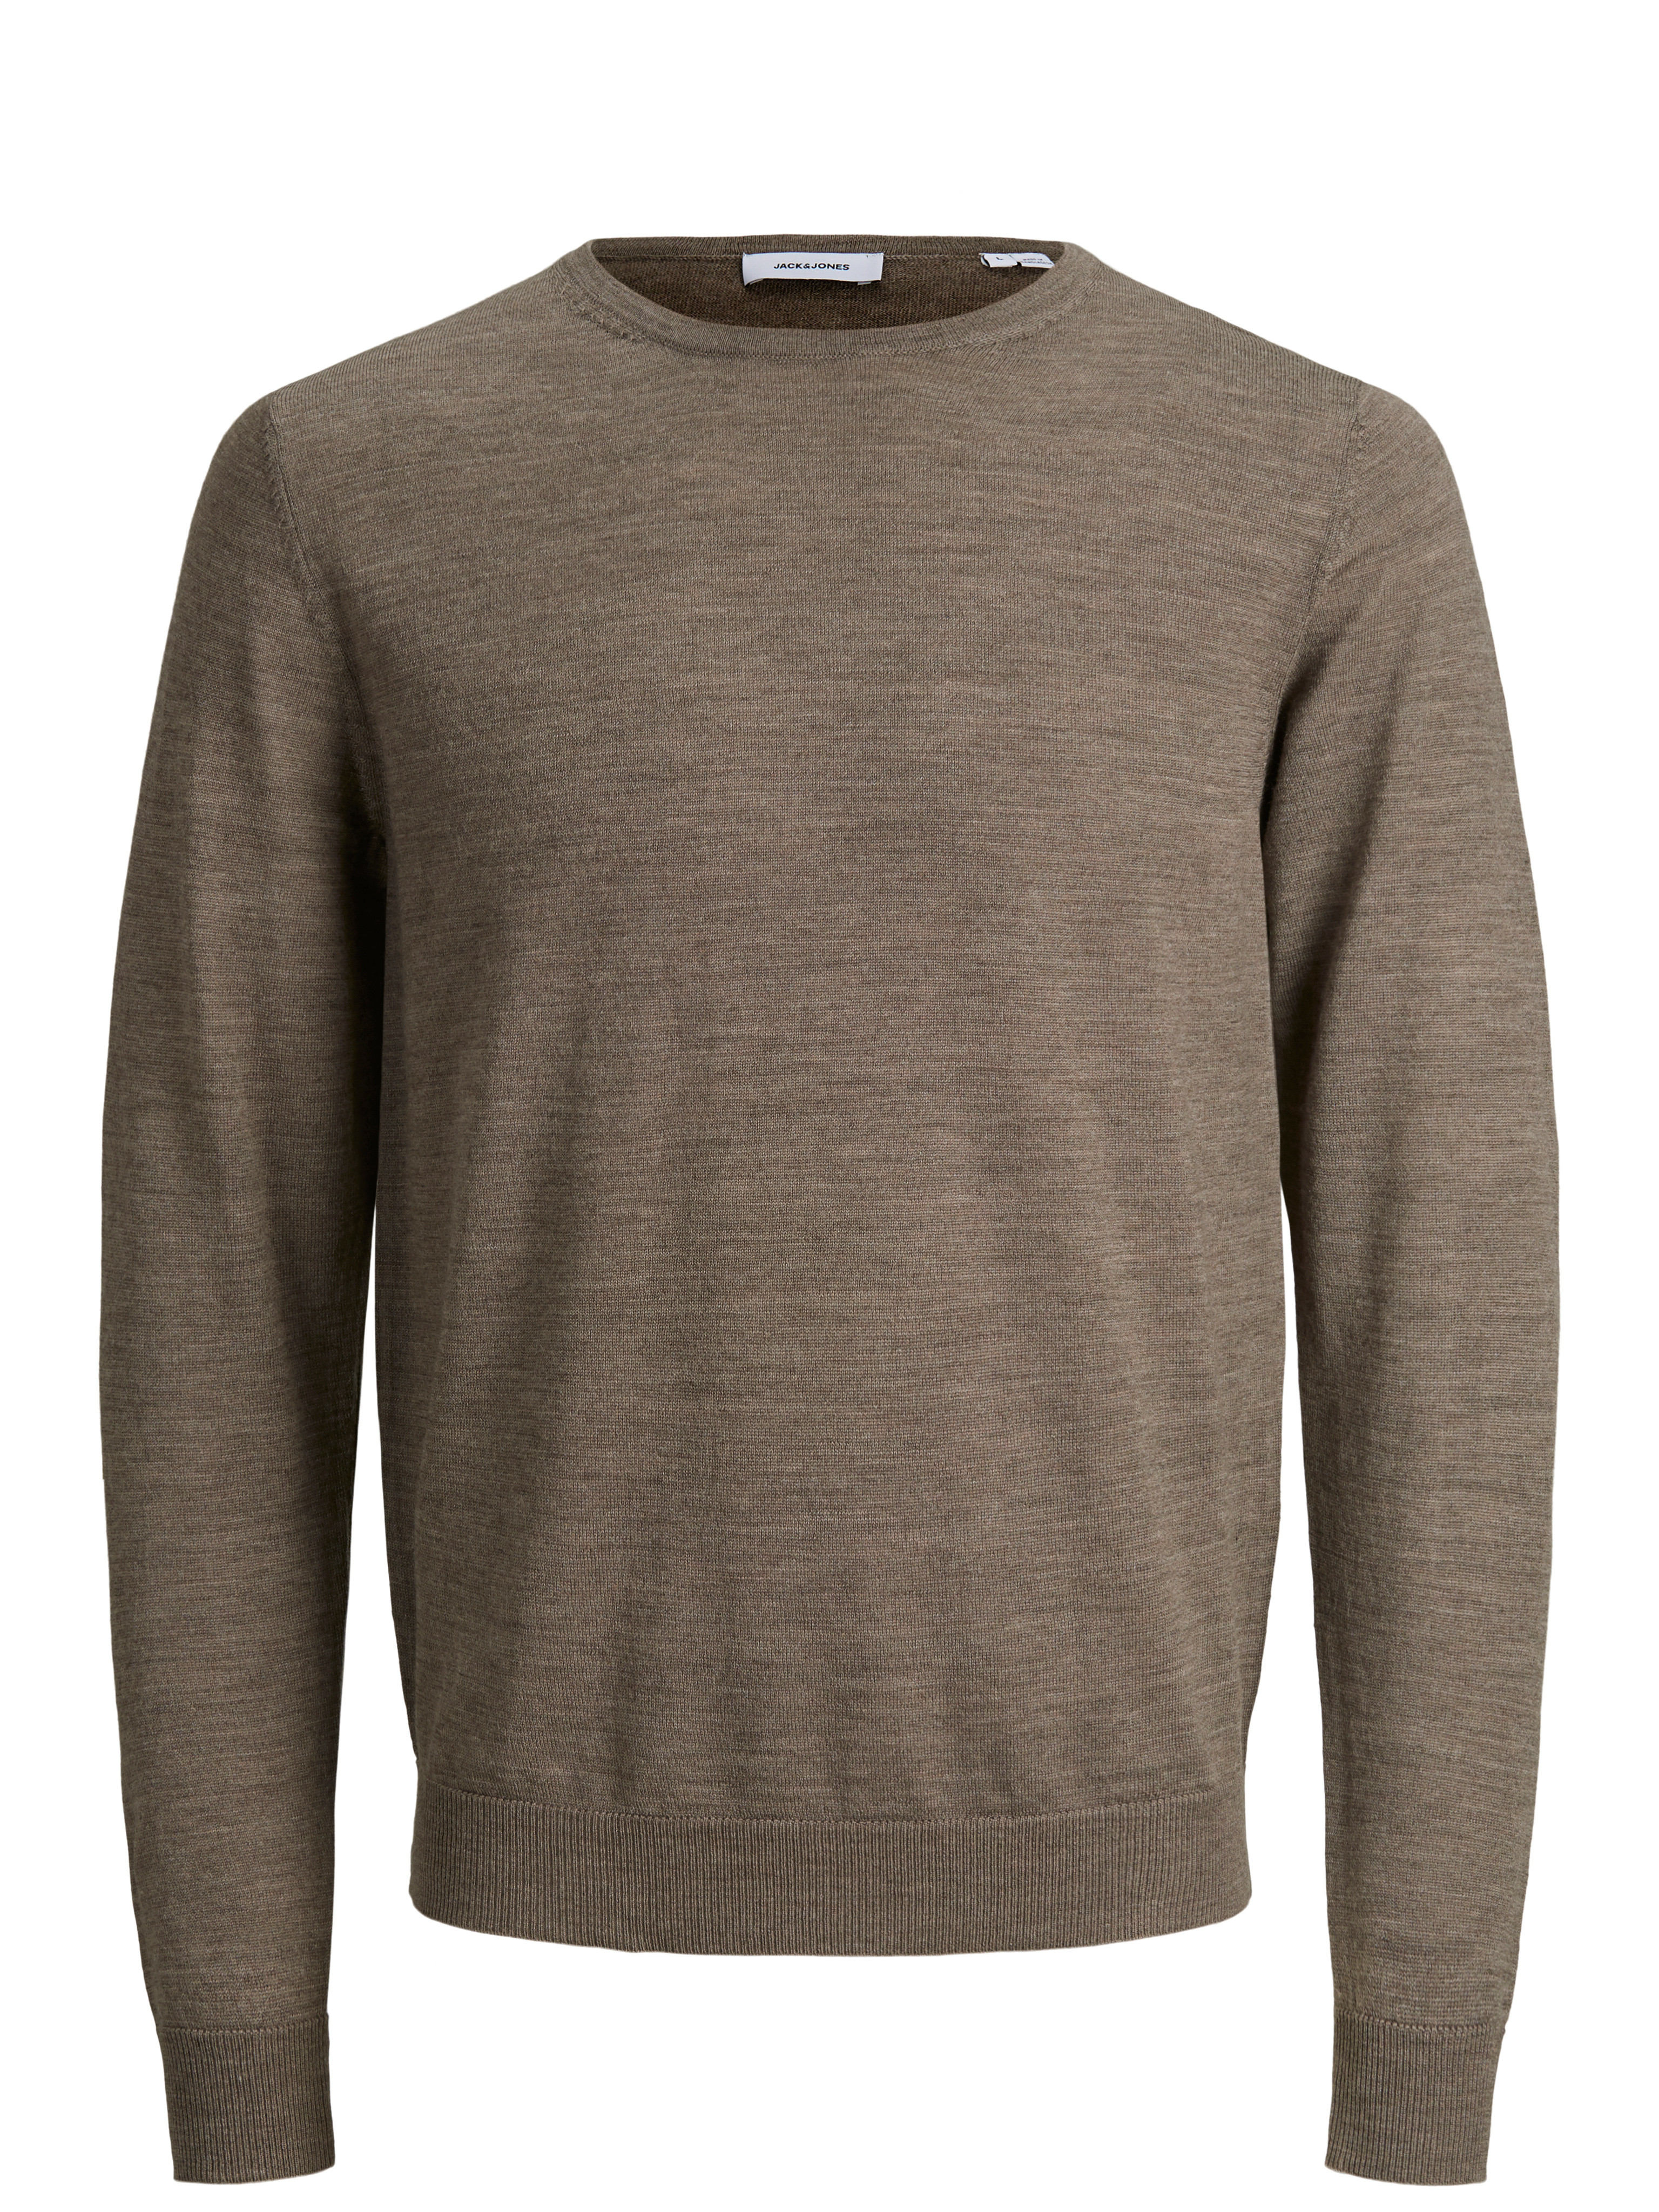 Men's knitted merino wool pullover, Beige, large image number 0